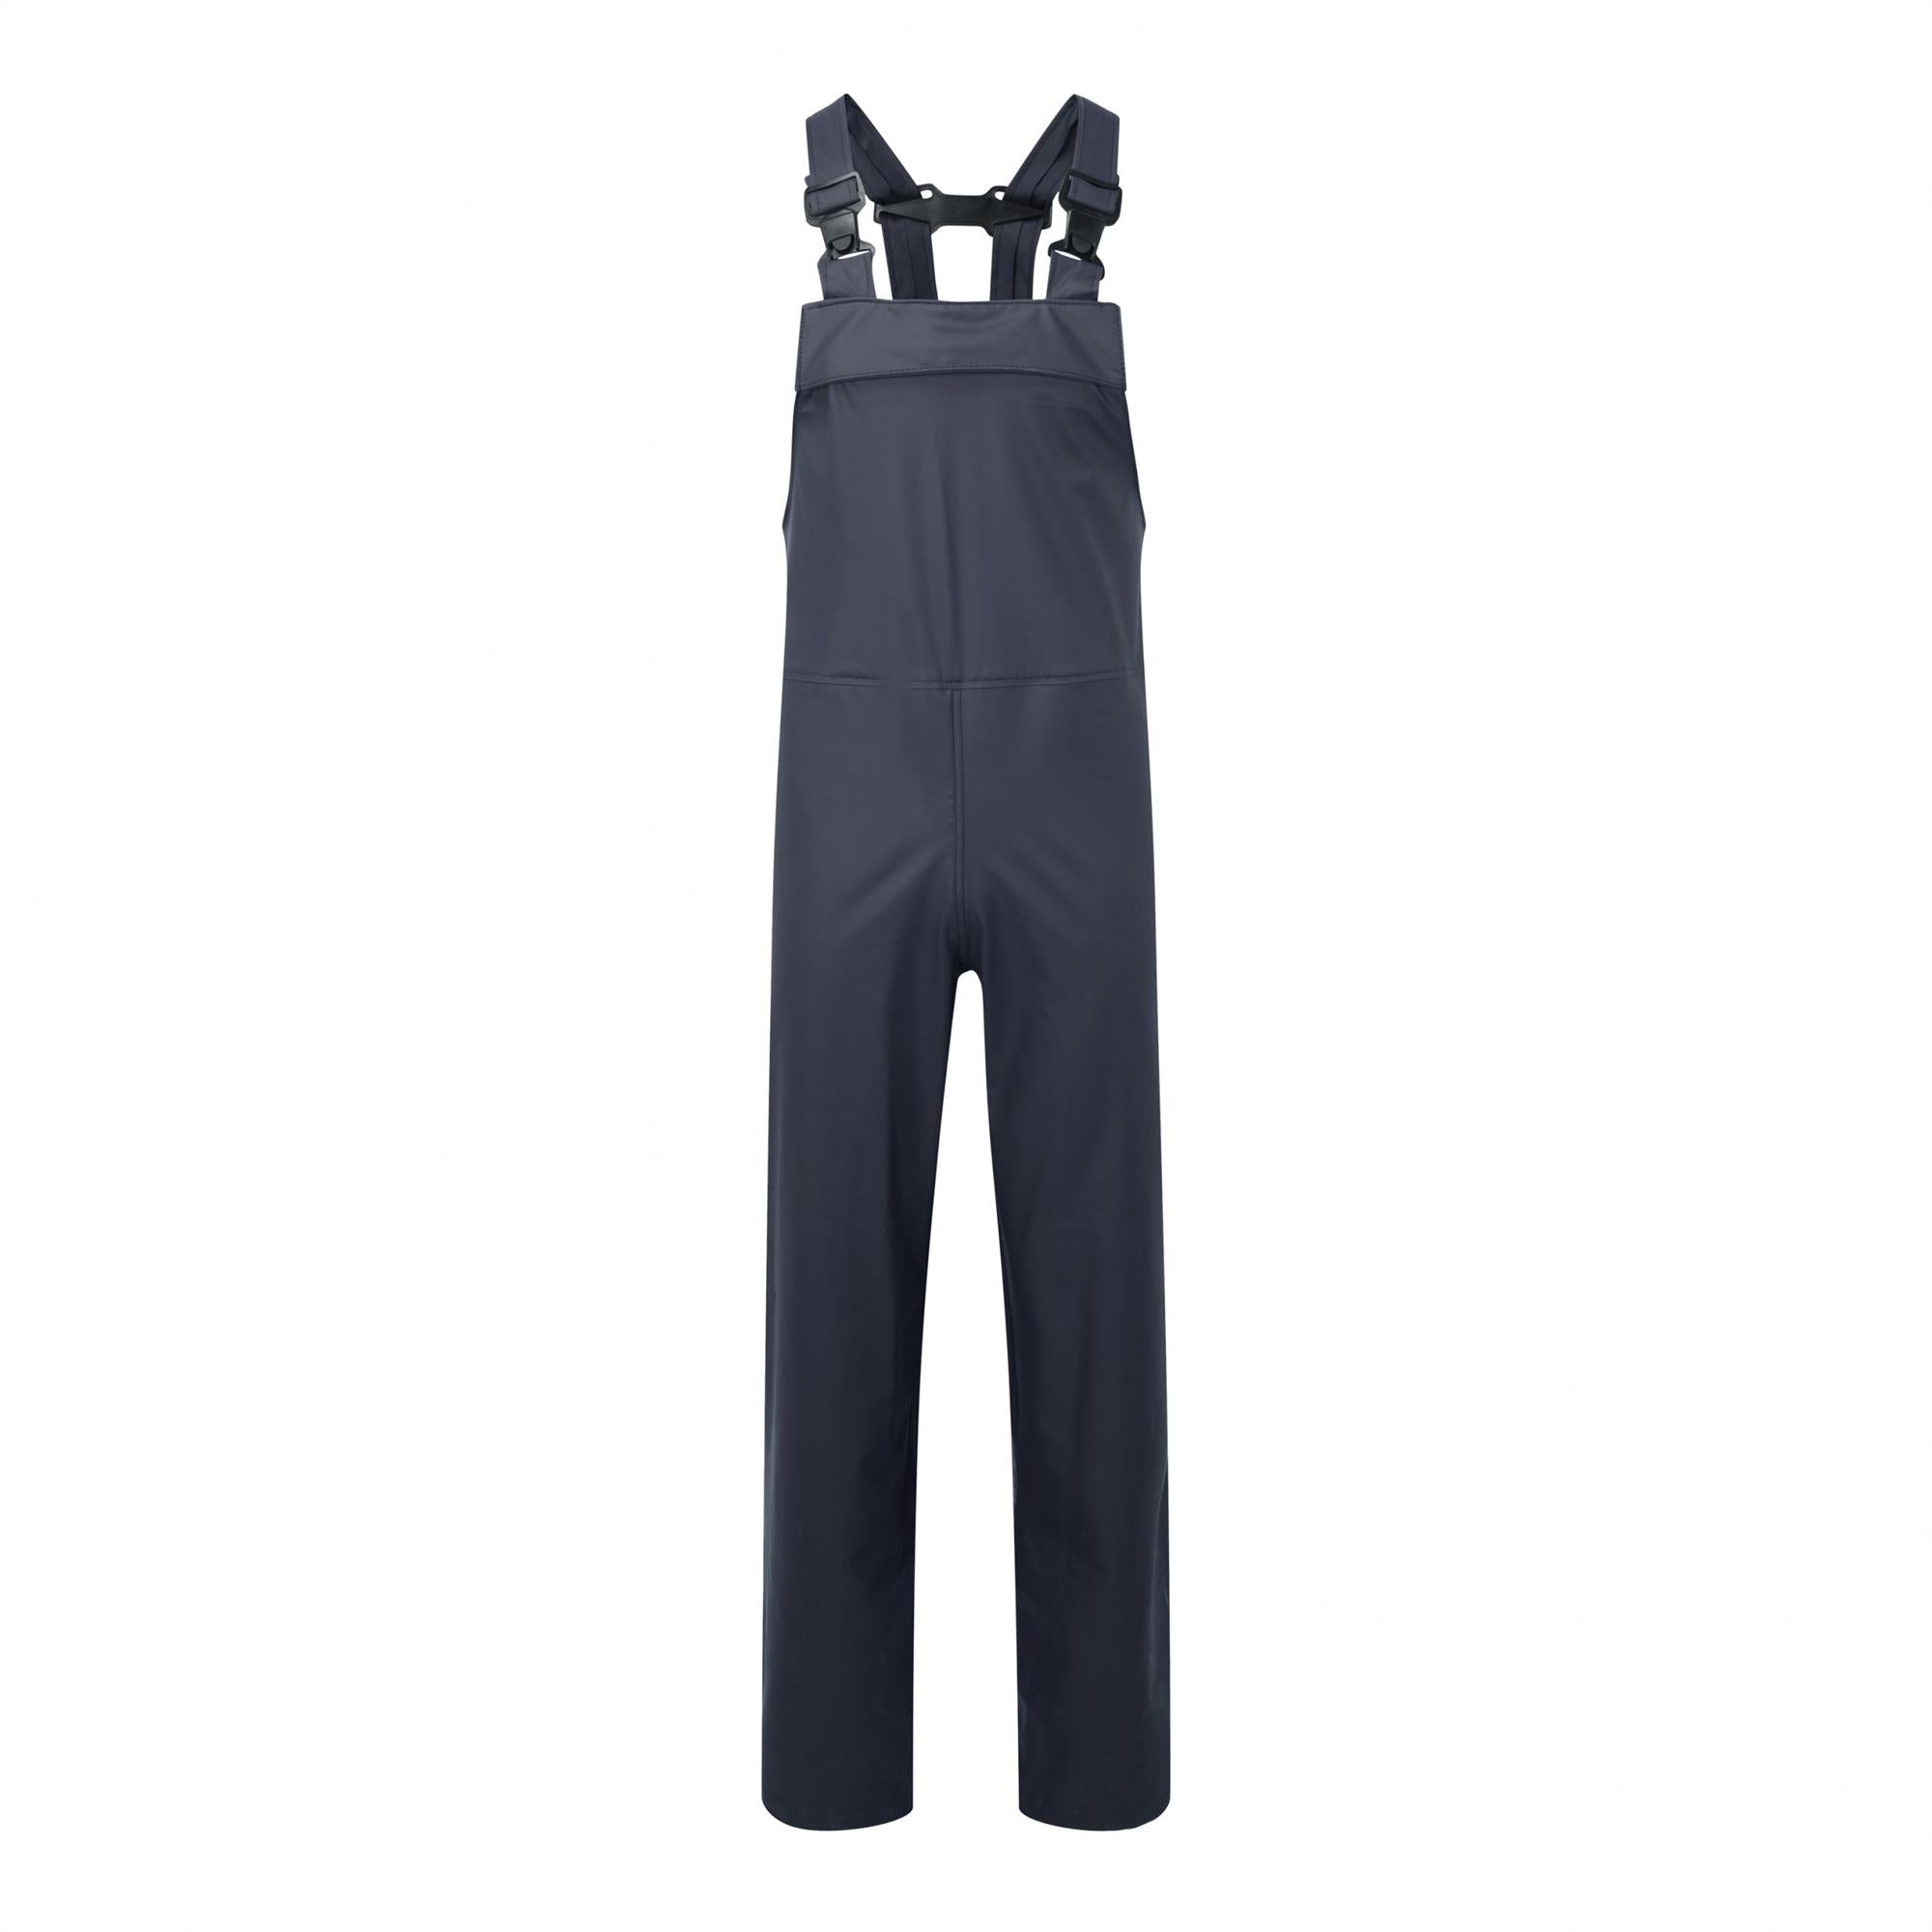 Fort water-proof breathable work dungarees bib & brace fishing/hiking #521